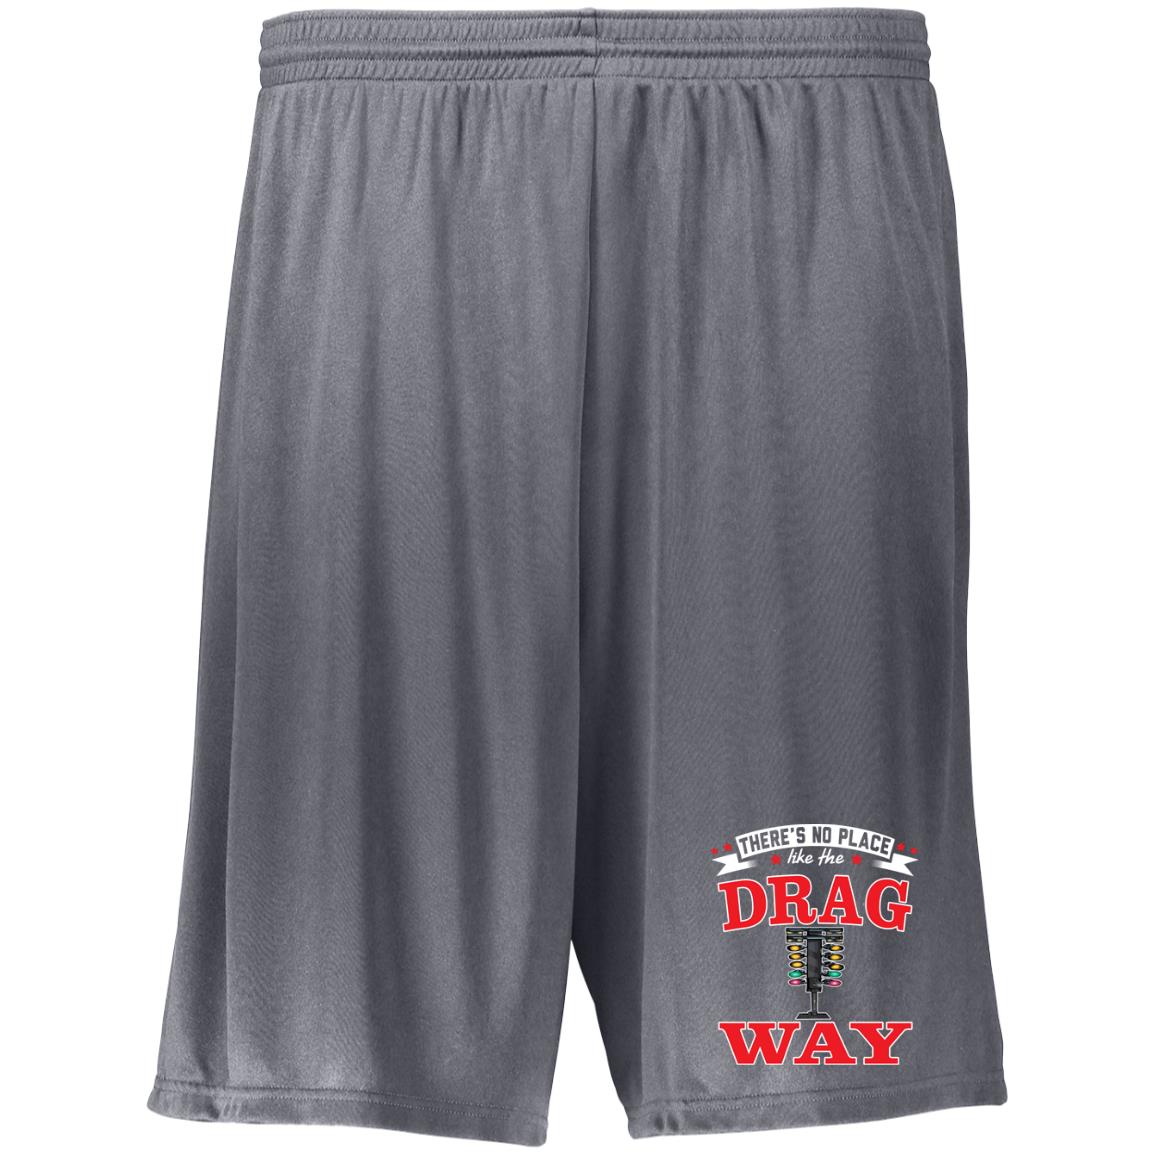 There's No Place Like The Dragway Moisture-Wicking 9 inch Inseam Training Shorts